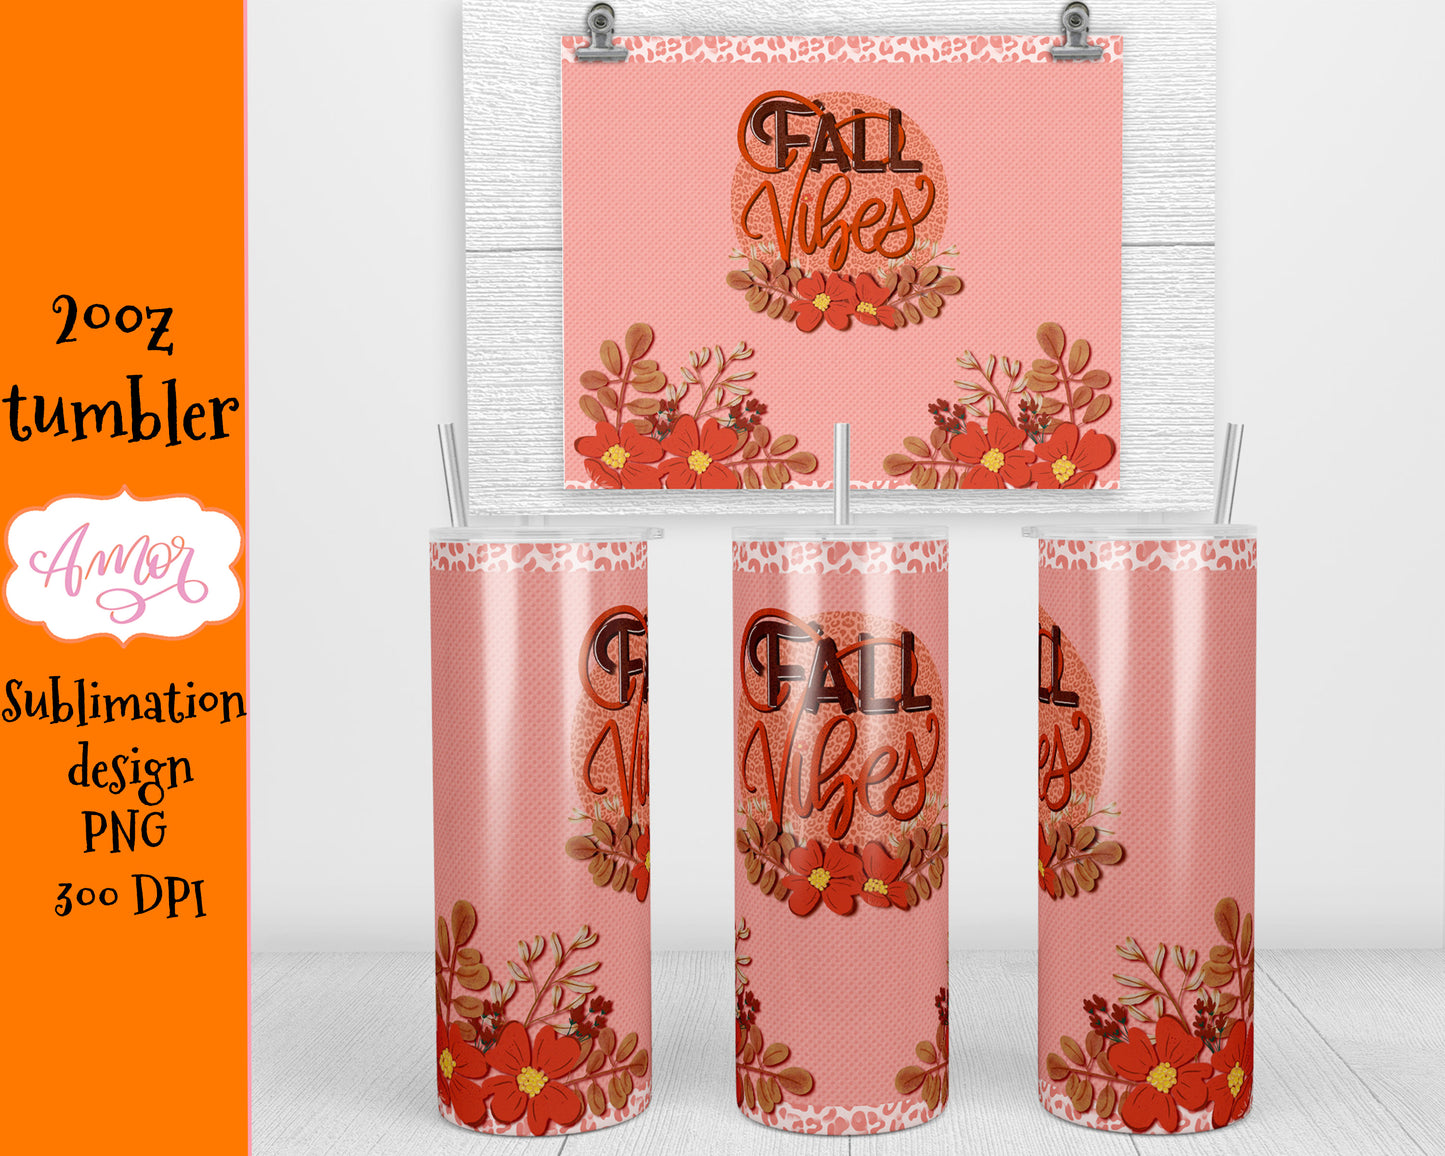 Fall Vibes sublimation design for 20oz skinny tumbler